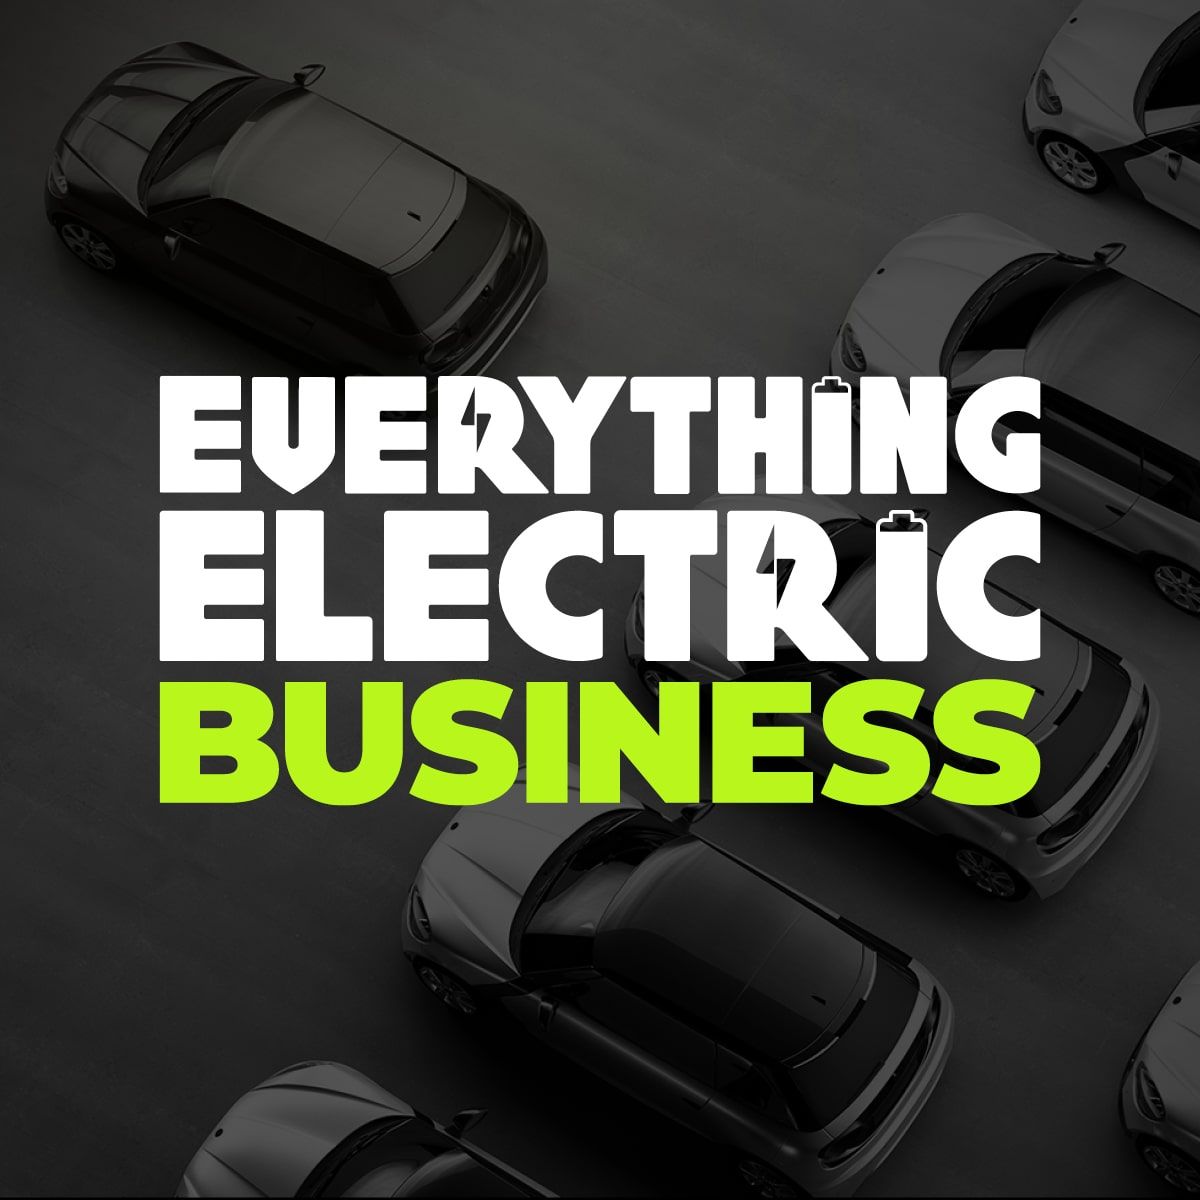 Everything Electric BUSINESS